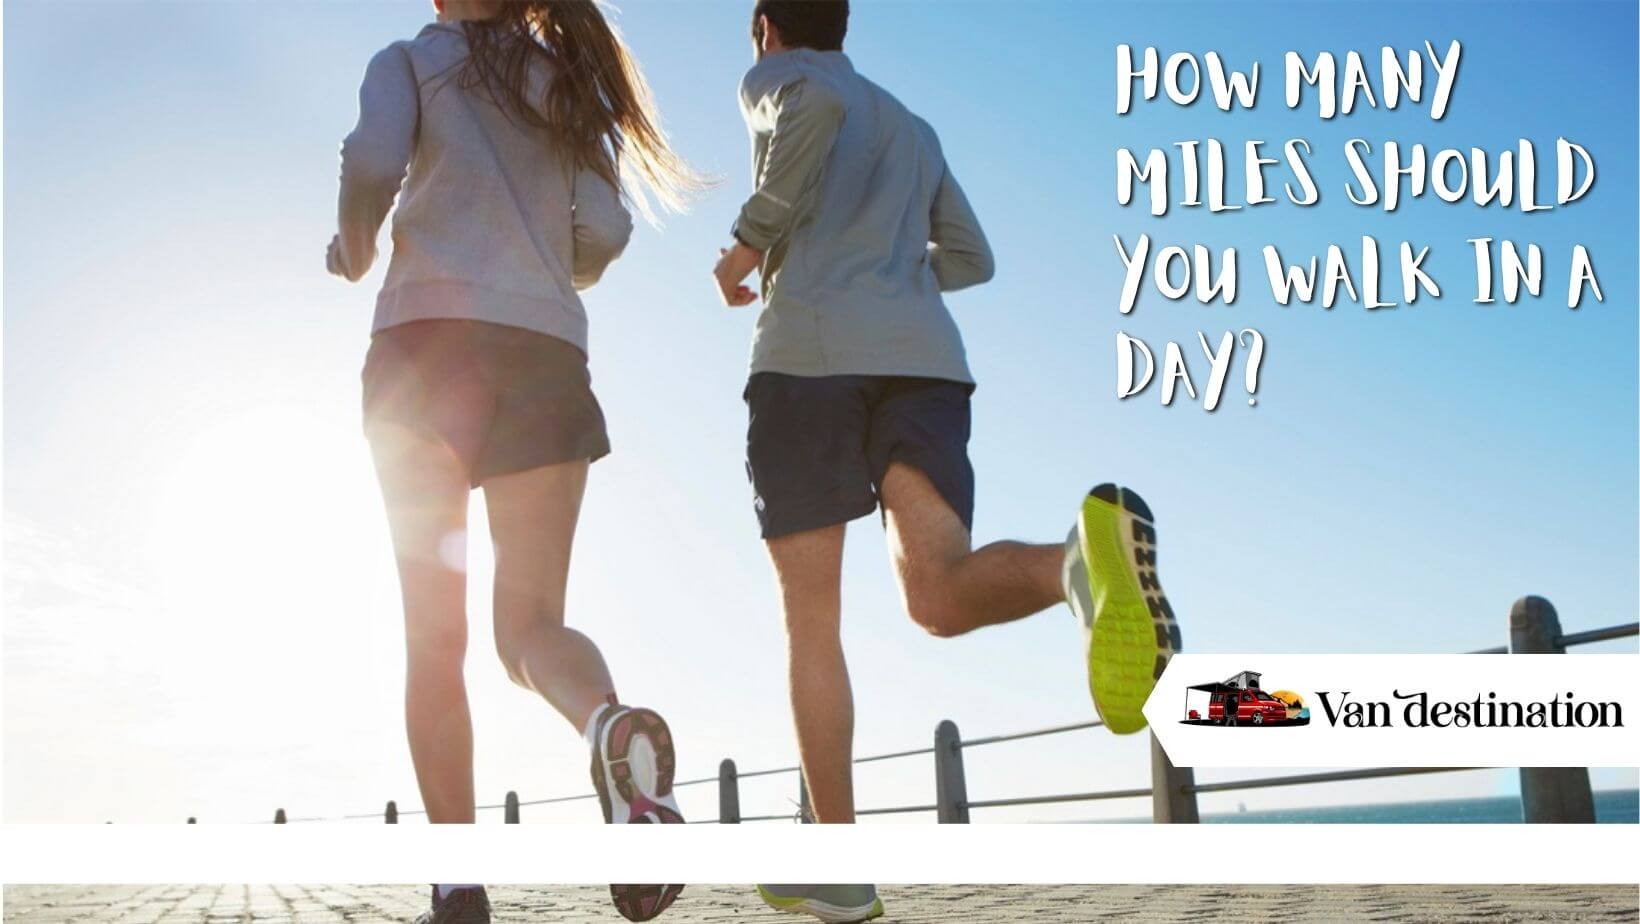 How Many Miles Should You Walk in a Day